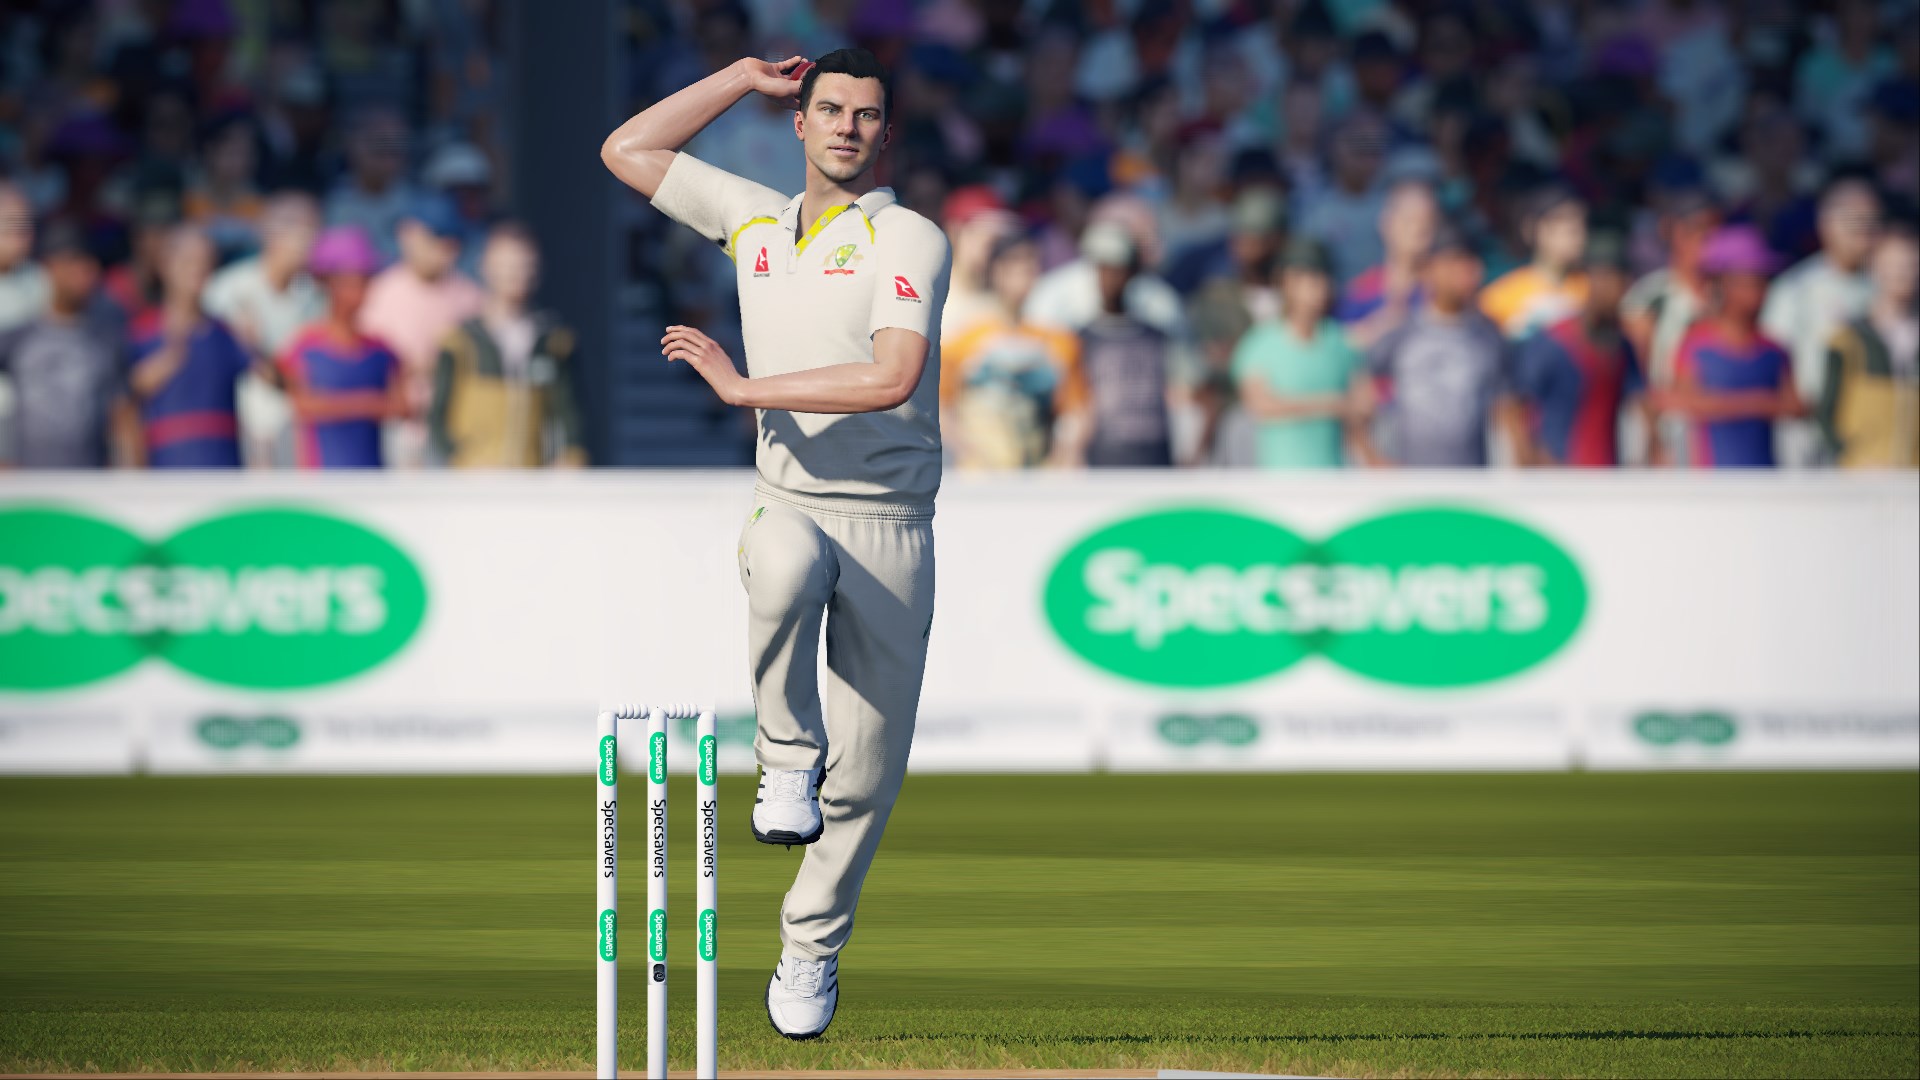 ashes cricket xbox store